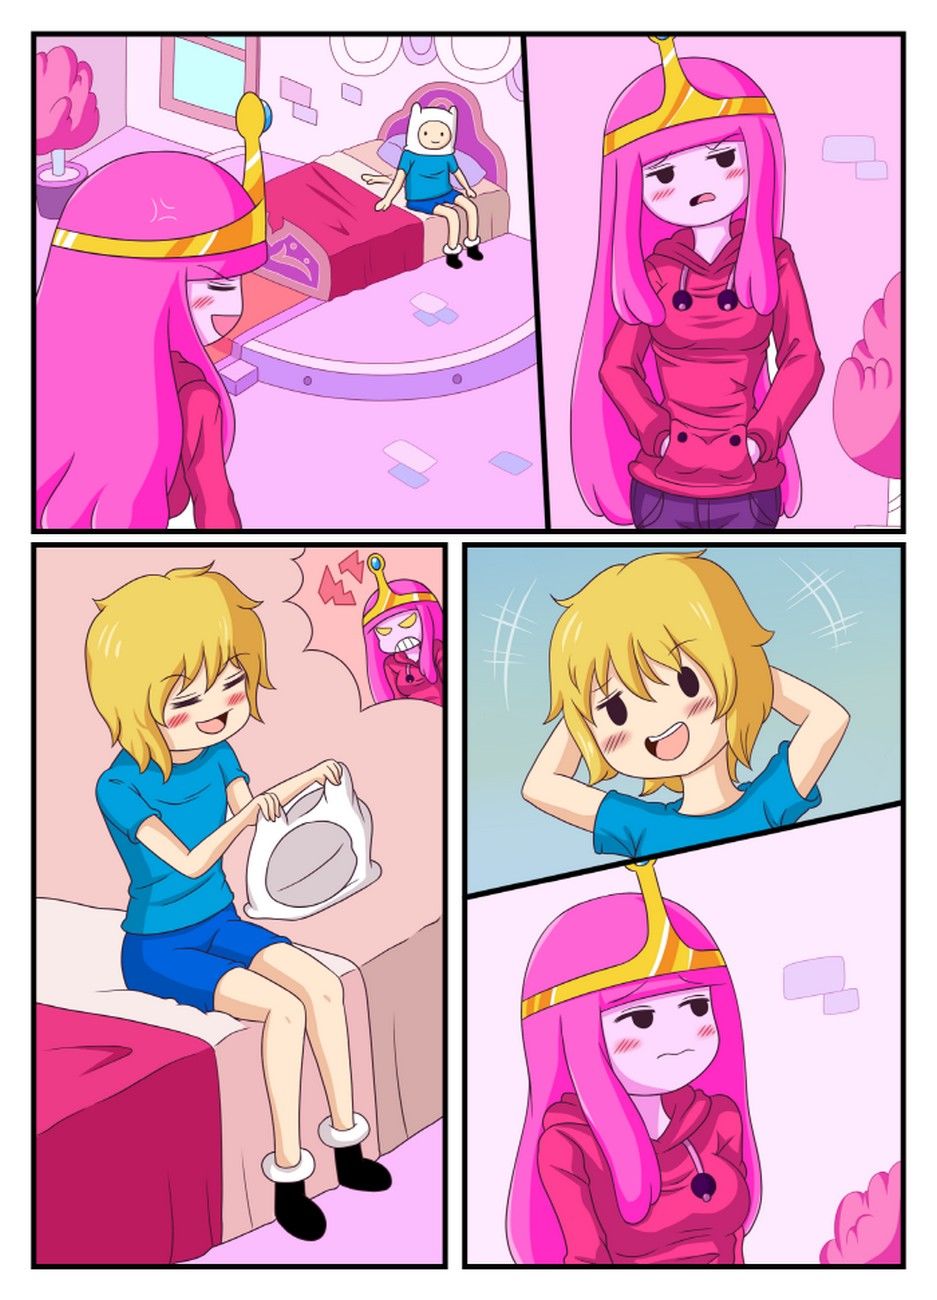 Adventure_Time_-_Adult_Time_1 comix_43401.jpg